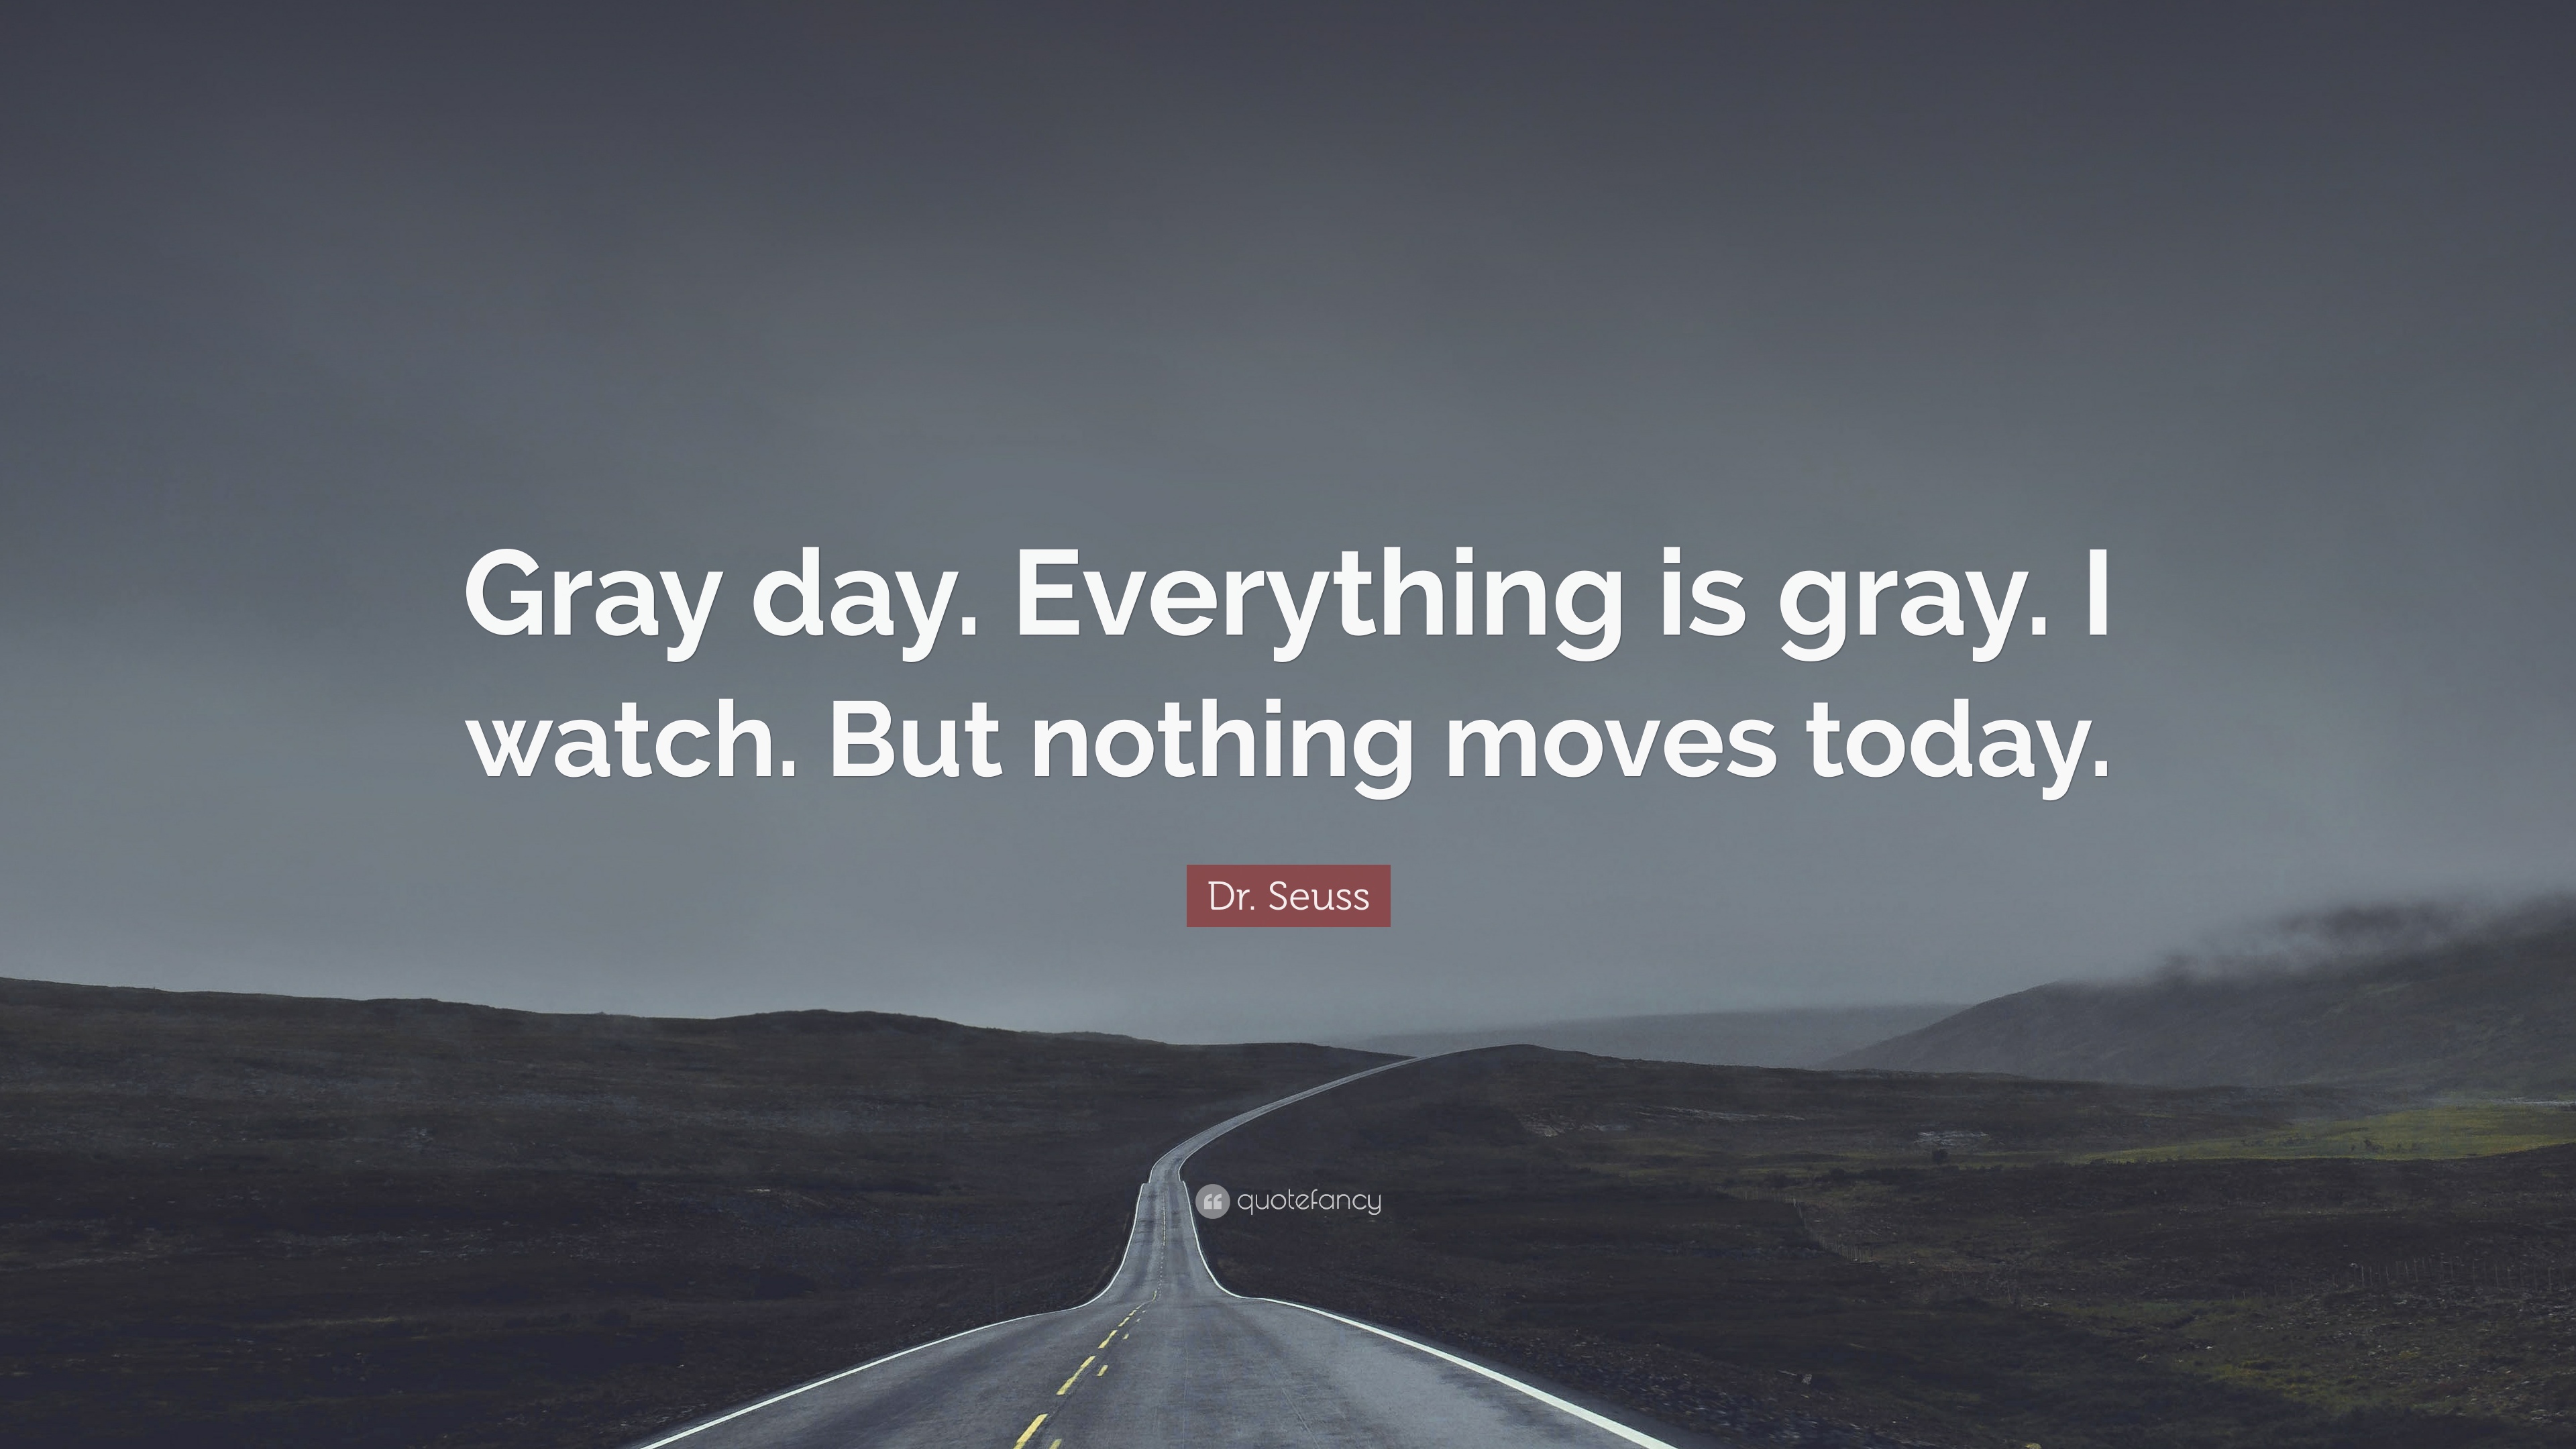 Dr. Seuss Quote: “Gray day. Everything is gray. I watch. But nothing